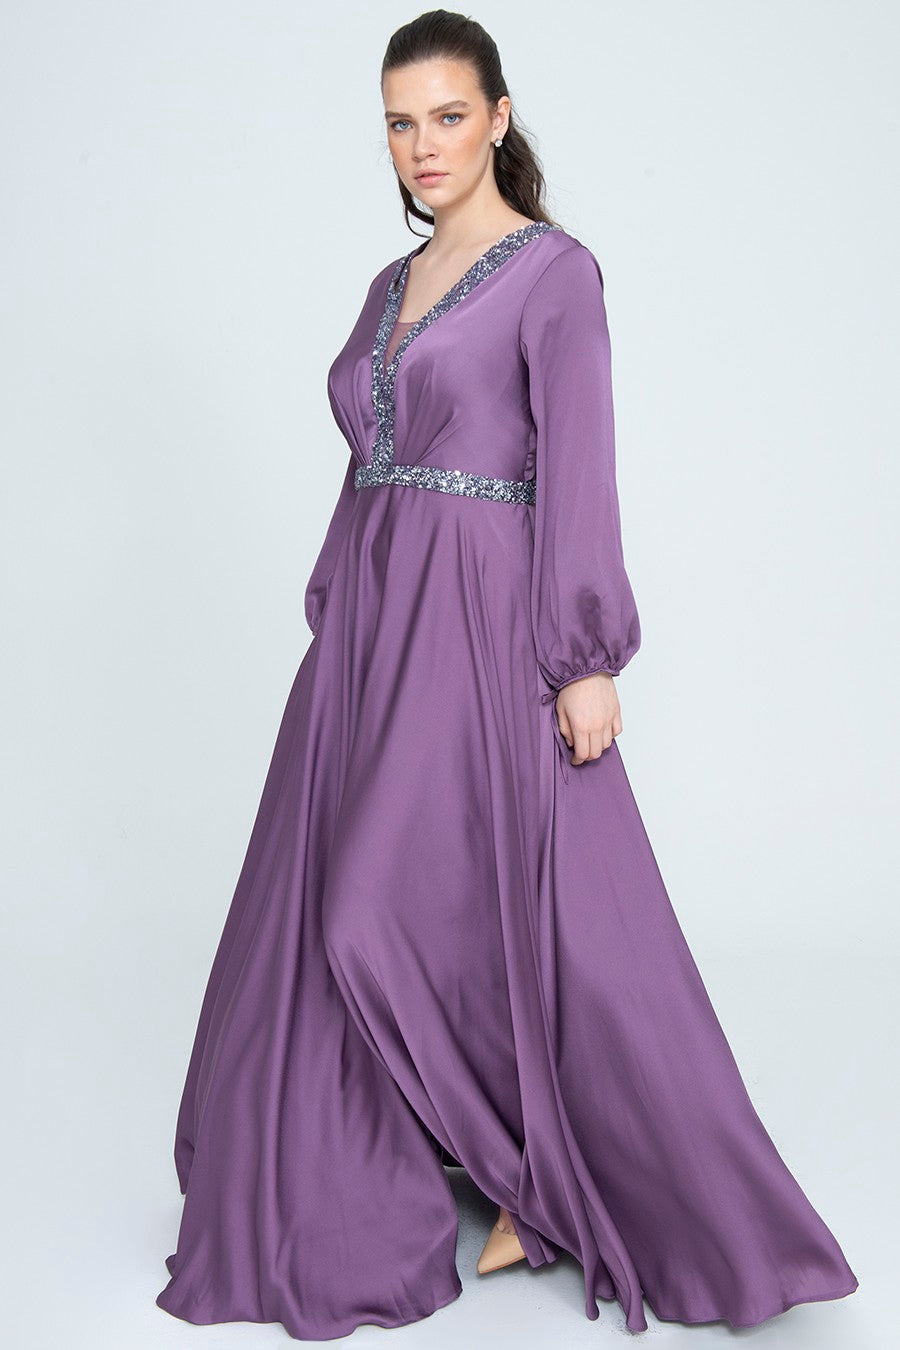 Olivia - Mystic Evenings | Evening and Prom Dresses